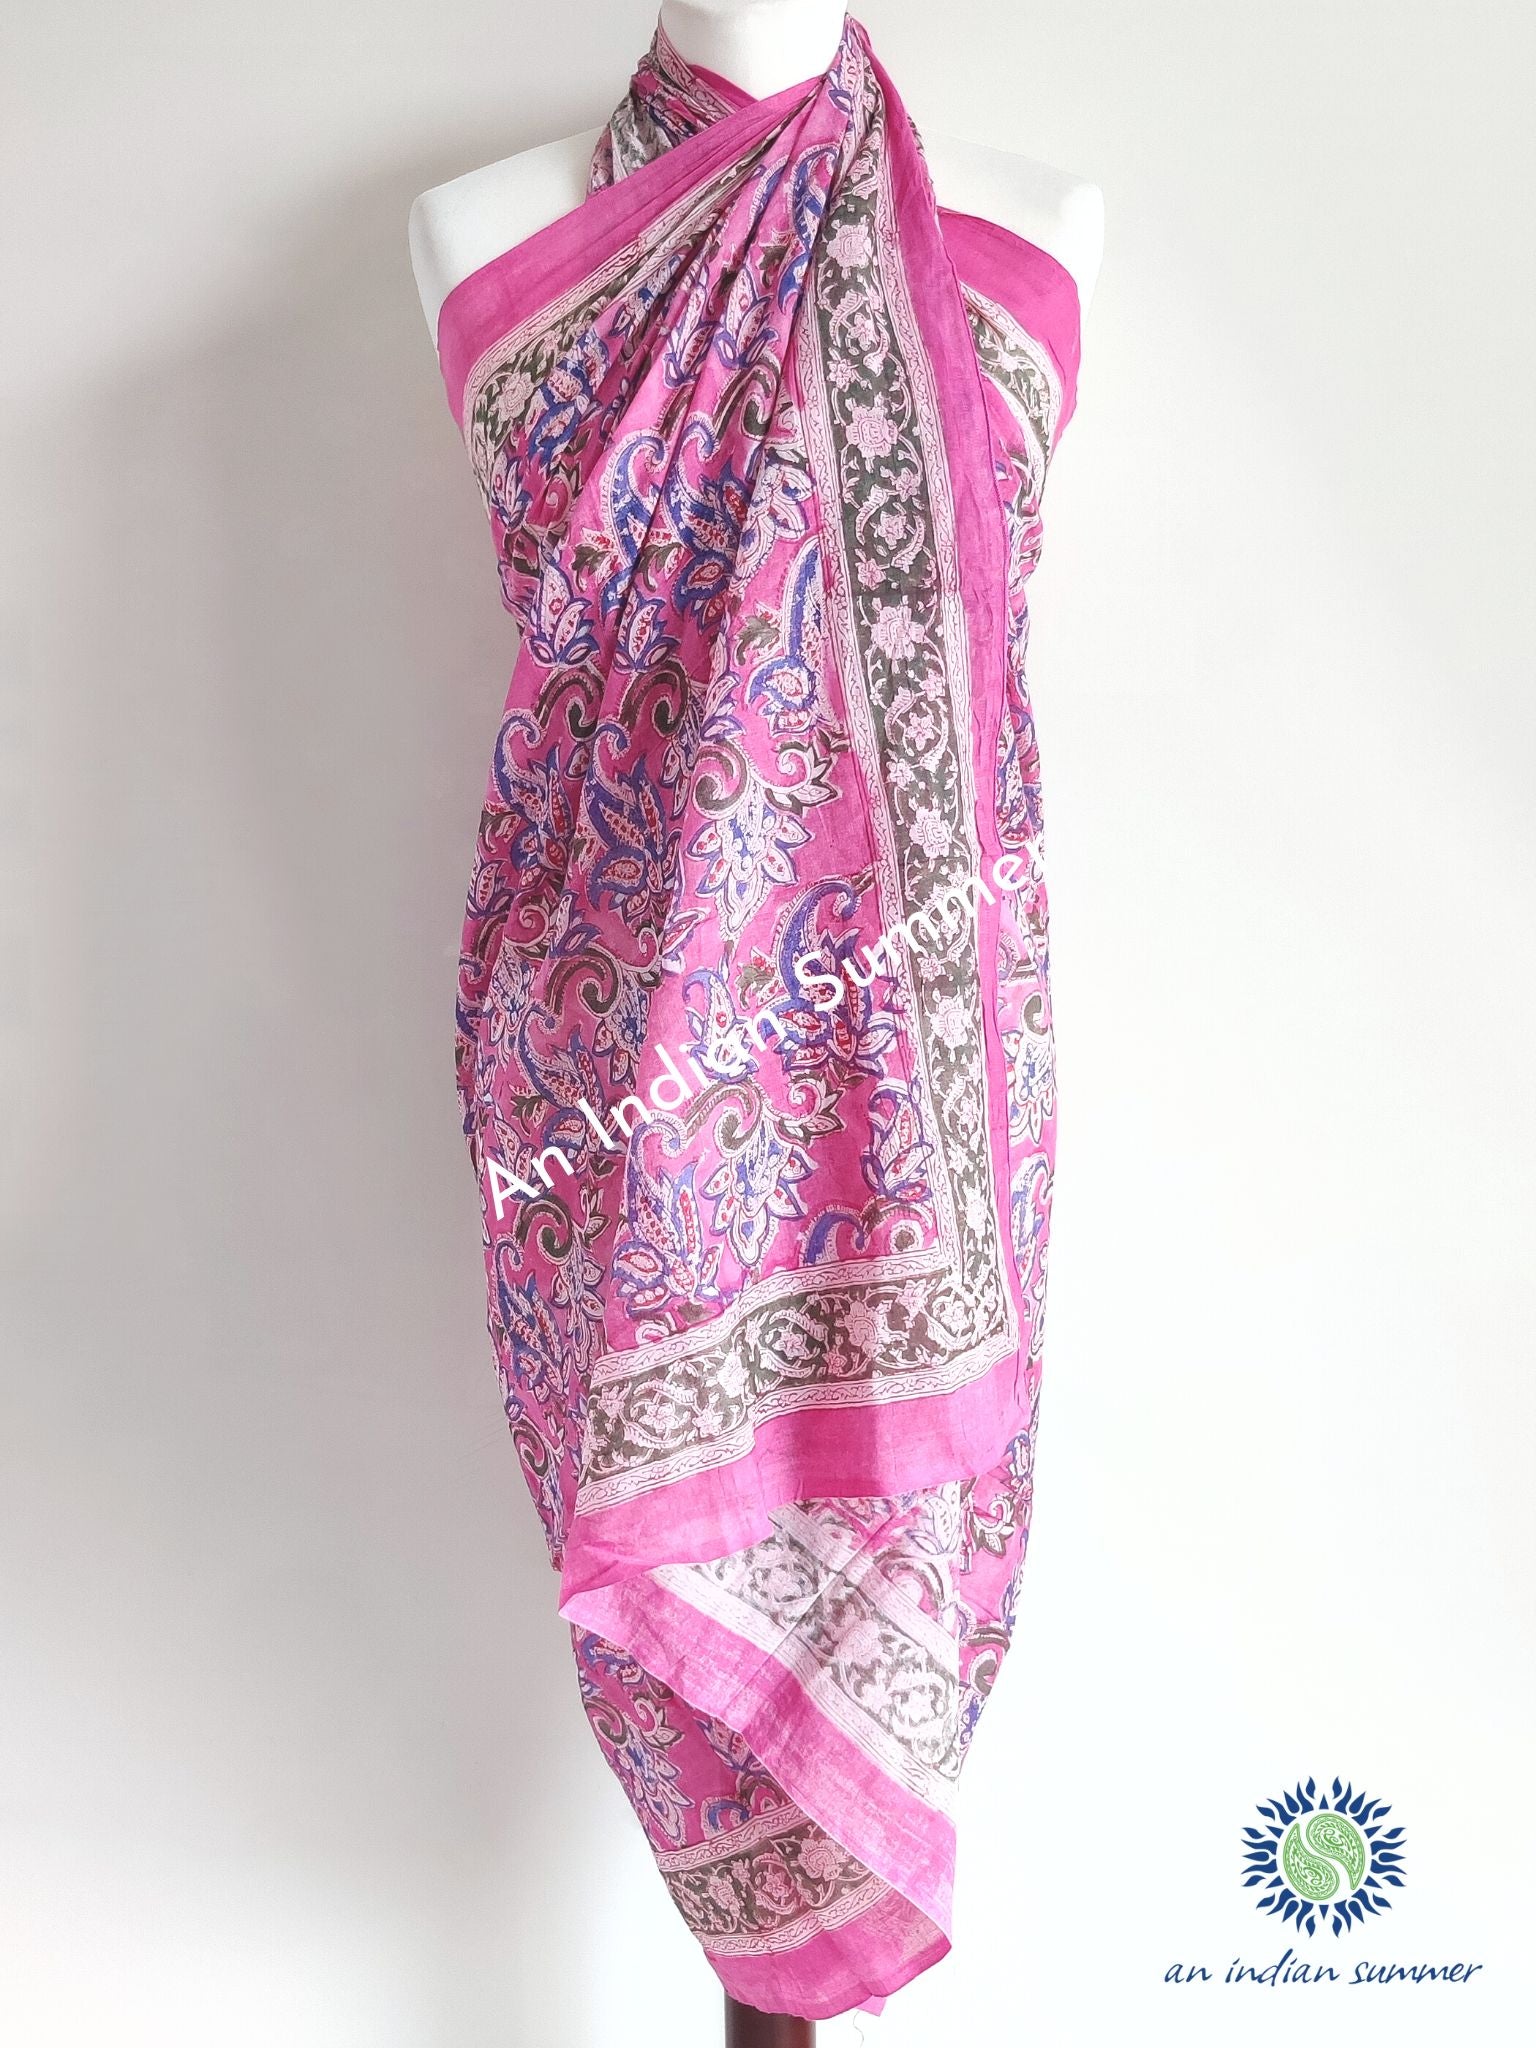 Anuradha Sarong Pareo | Pink Paisley Design | Hand Block Printed | Soft Cotton Voile | An Indian Summer | Seasonless Timeless Sustainable Ethical Authentic Artisan Conscious Clothing Lifestyle Brand